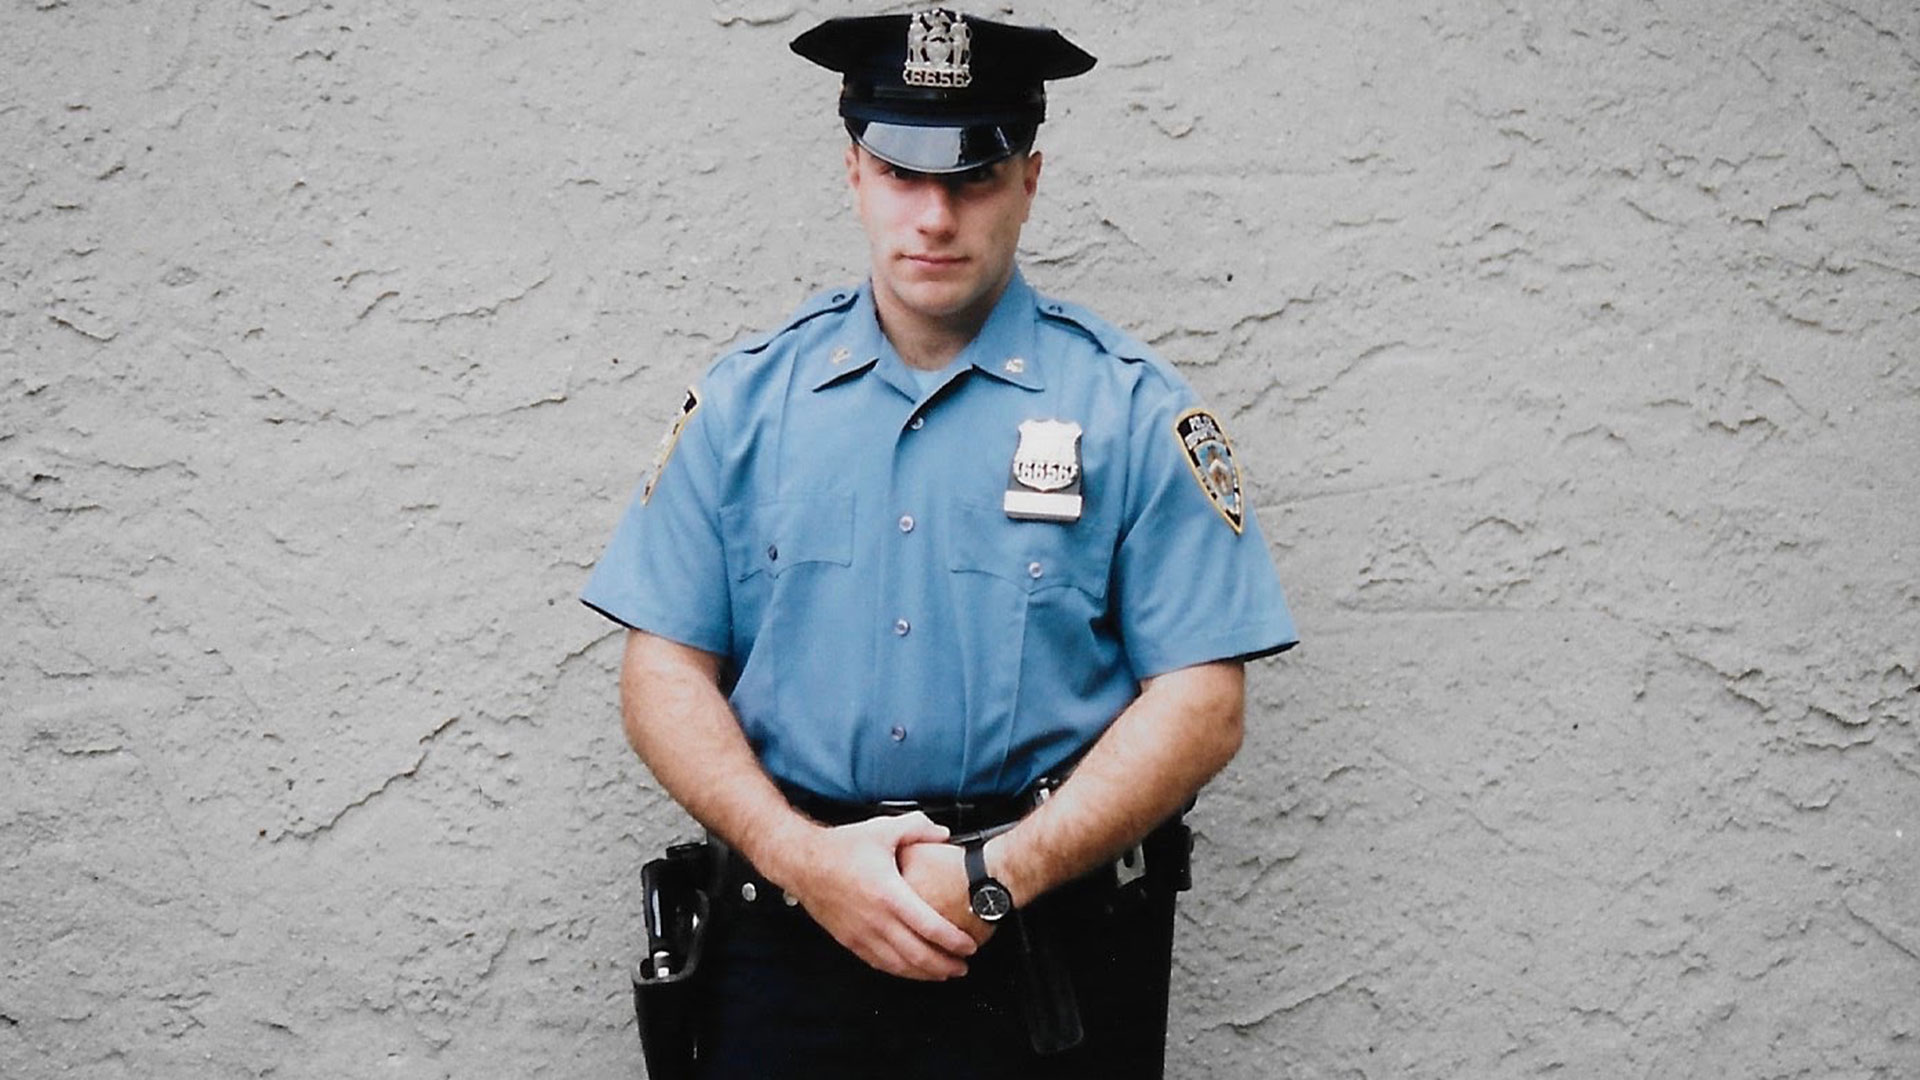 Chubby cops pictures